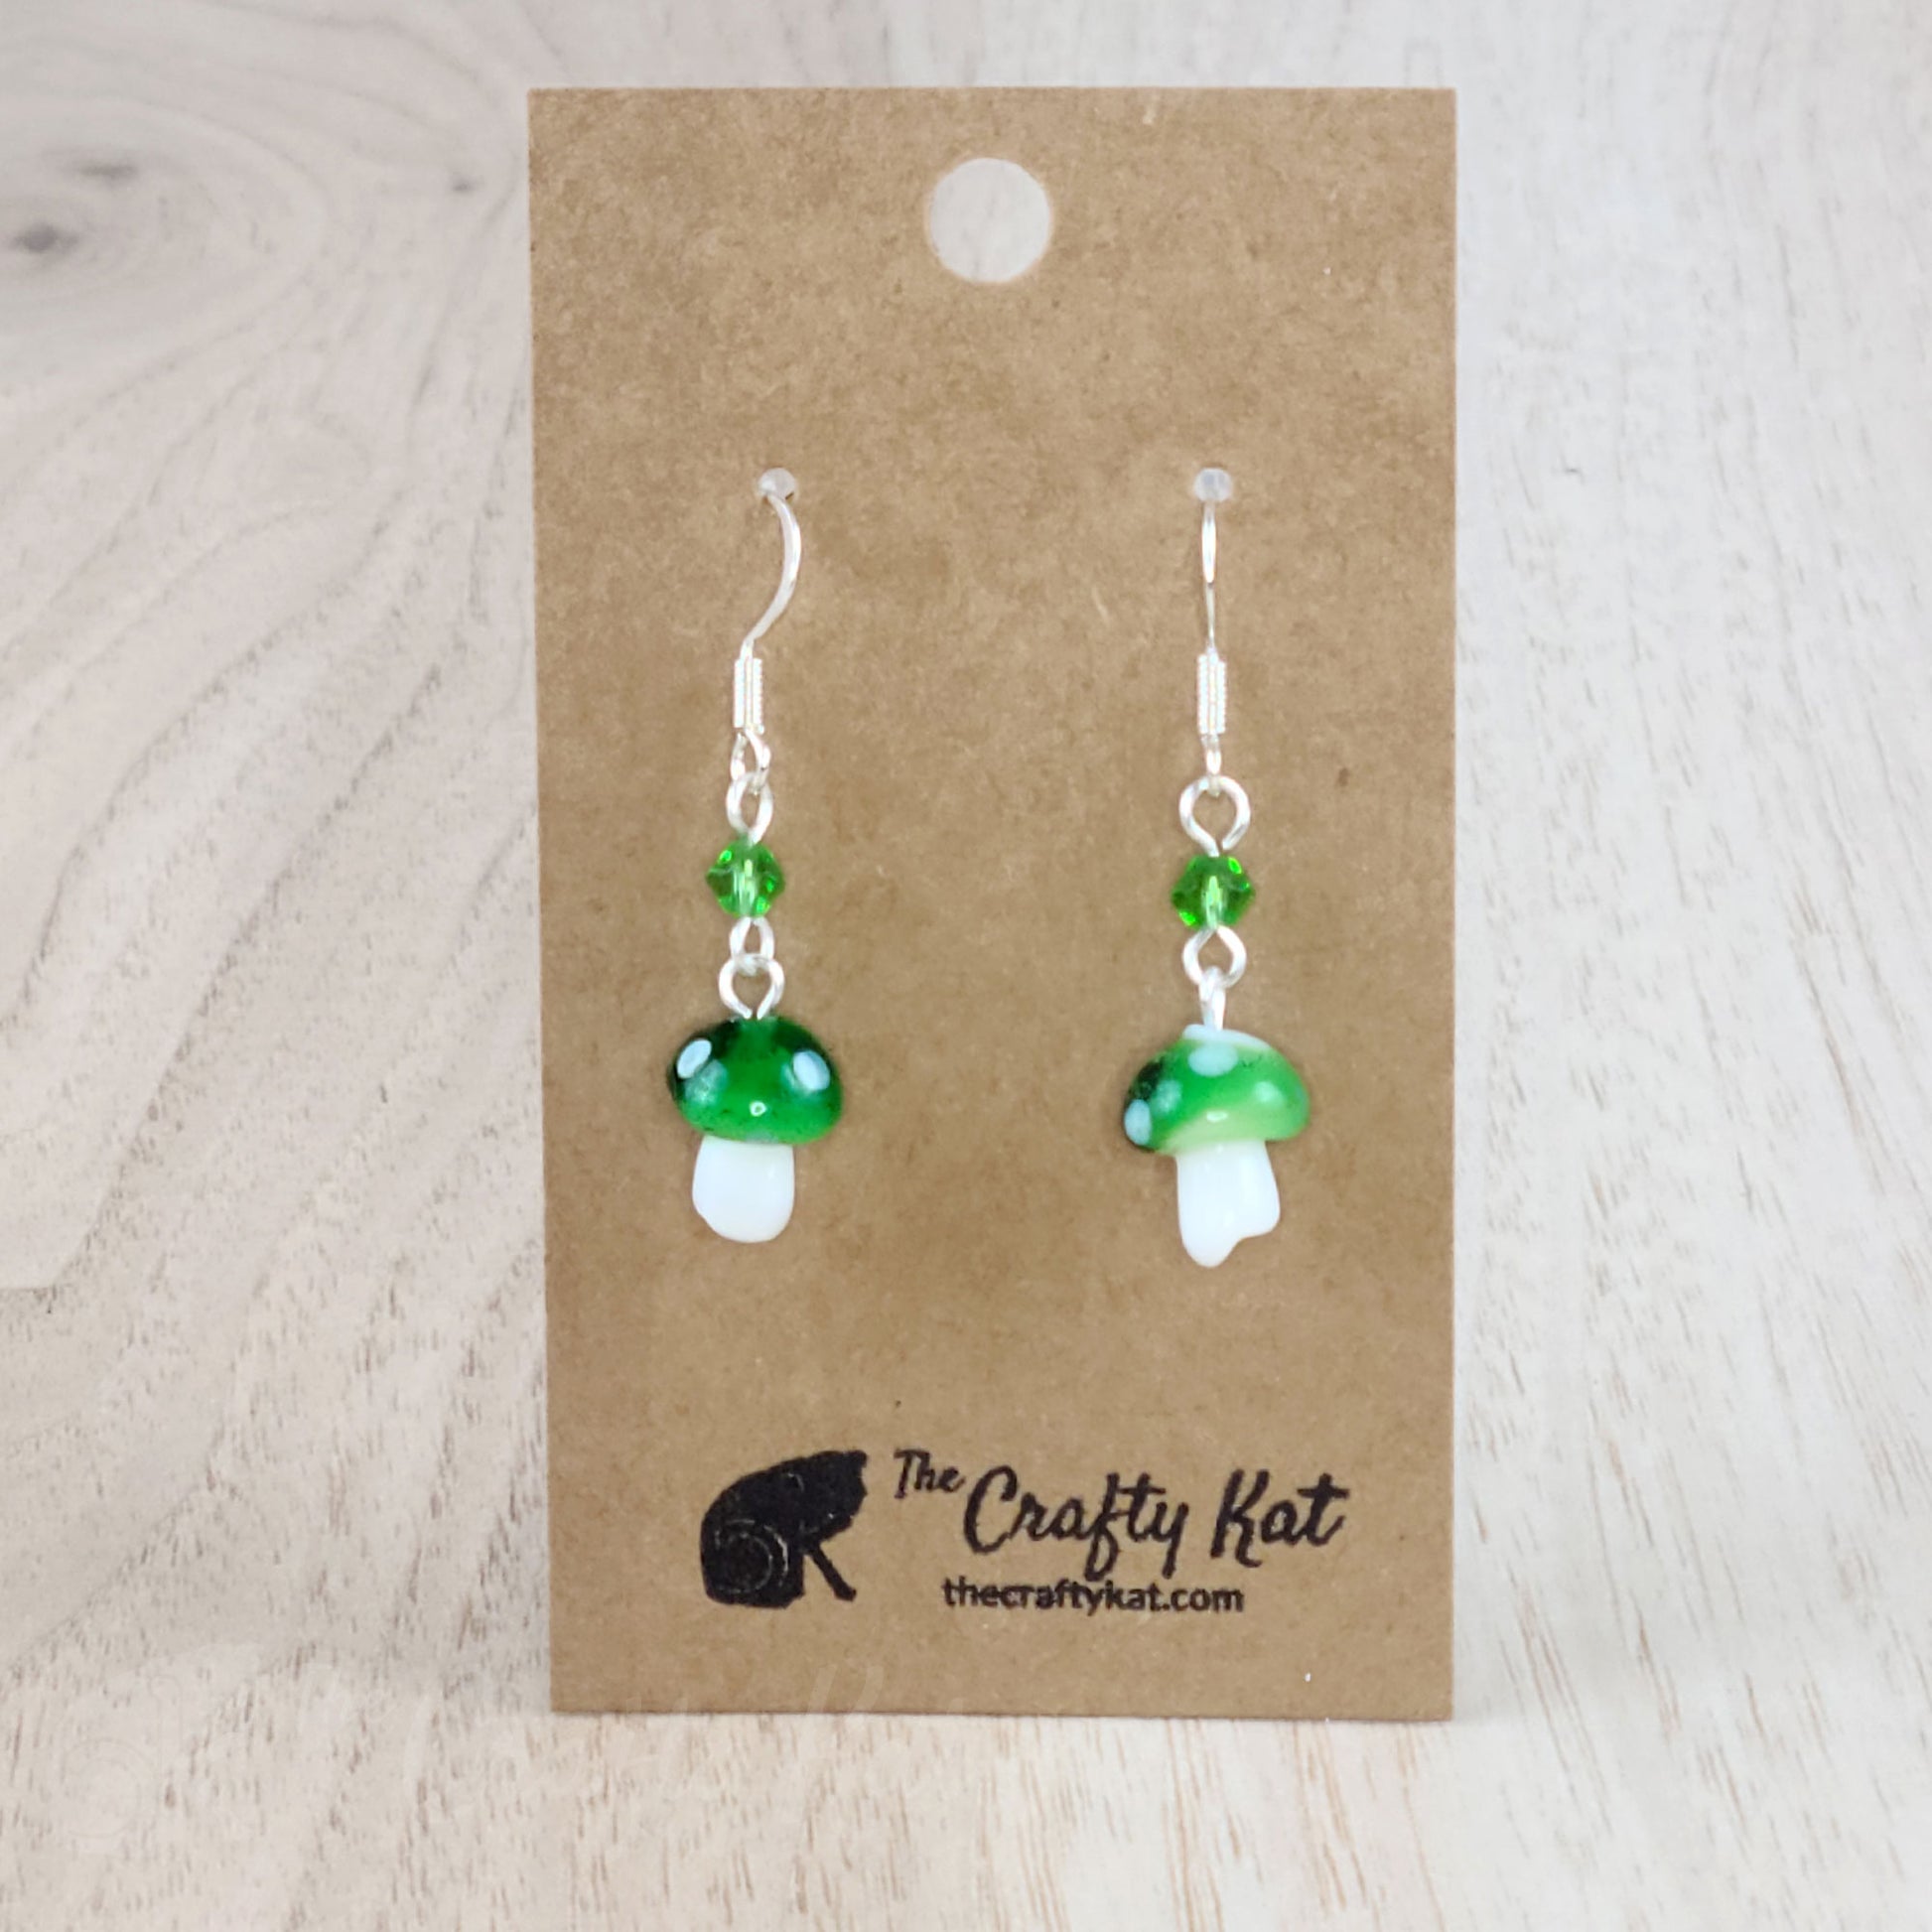 Mushroom-shaped tiered earrings made of lampwork and pressed glass beads with silver-plated base metal fittings. These mushrooms are kelly green with white spots.